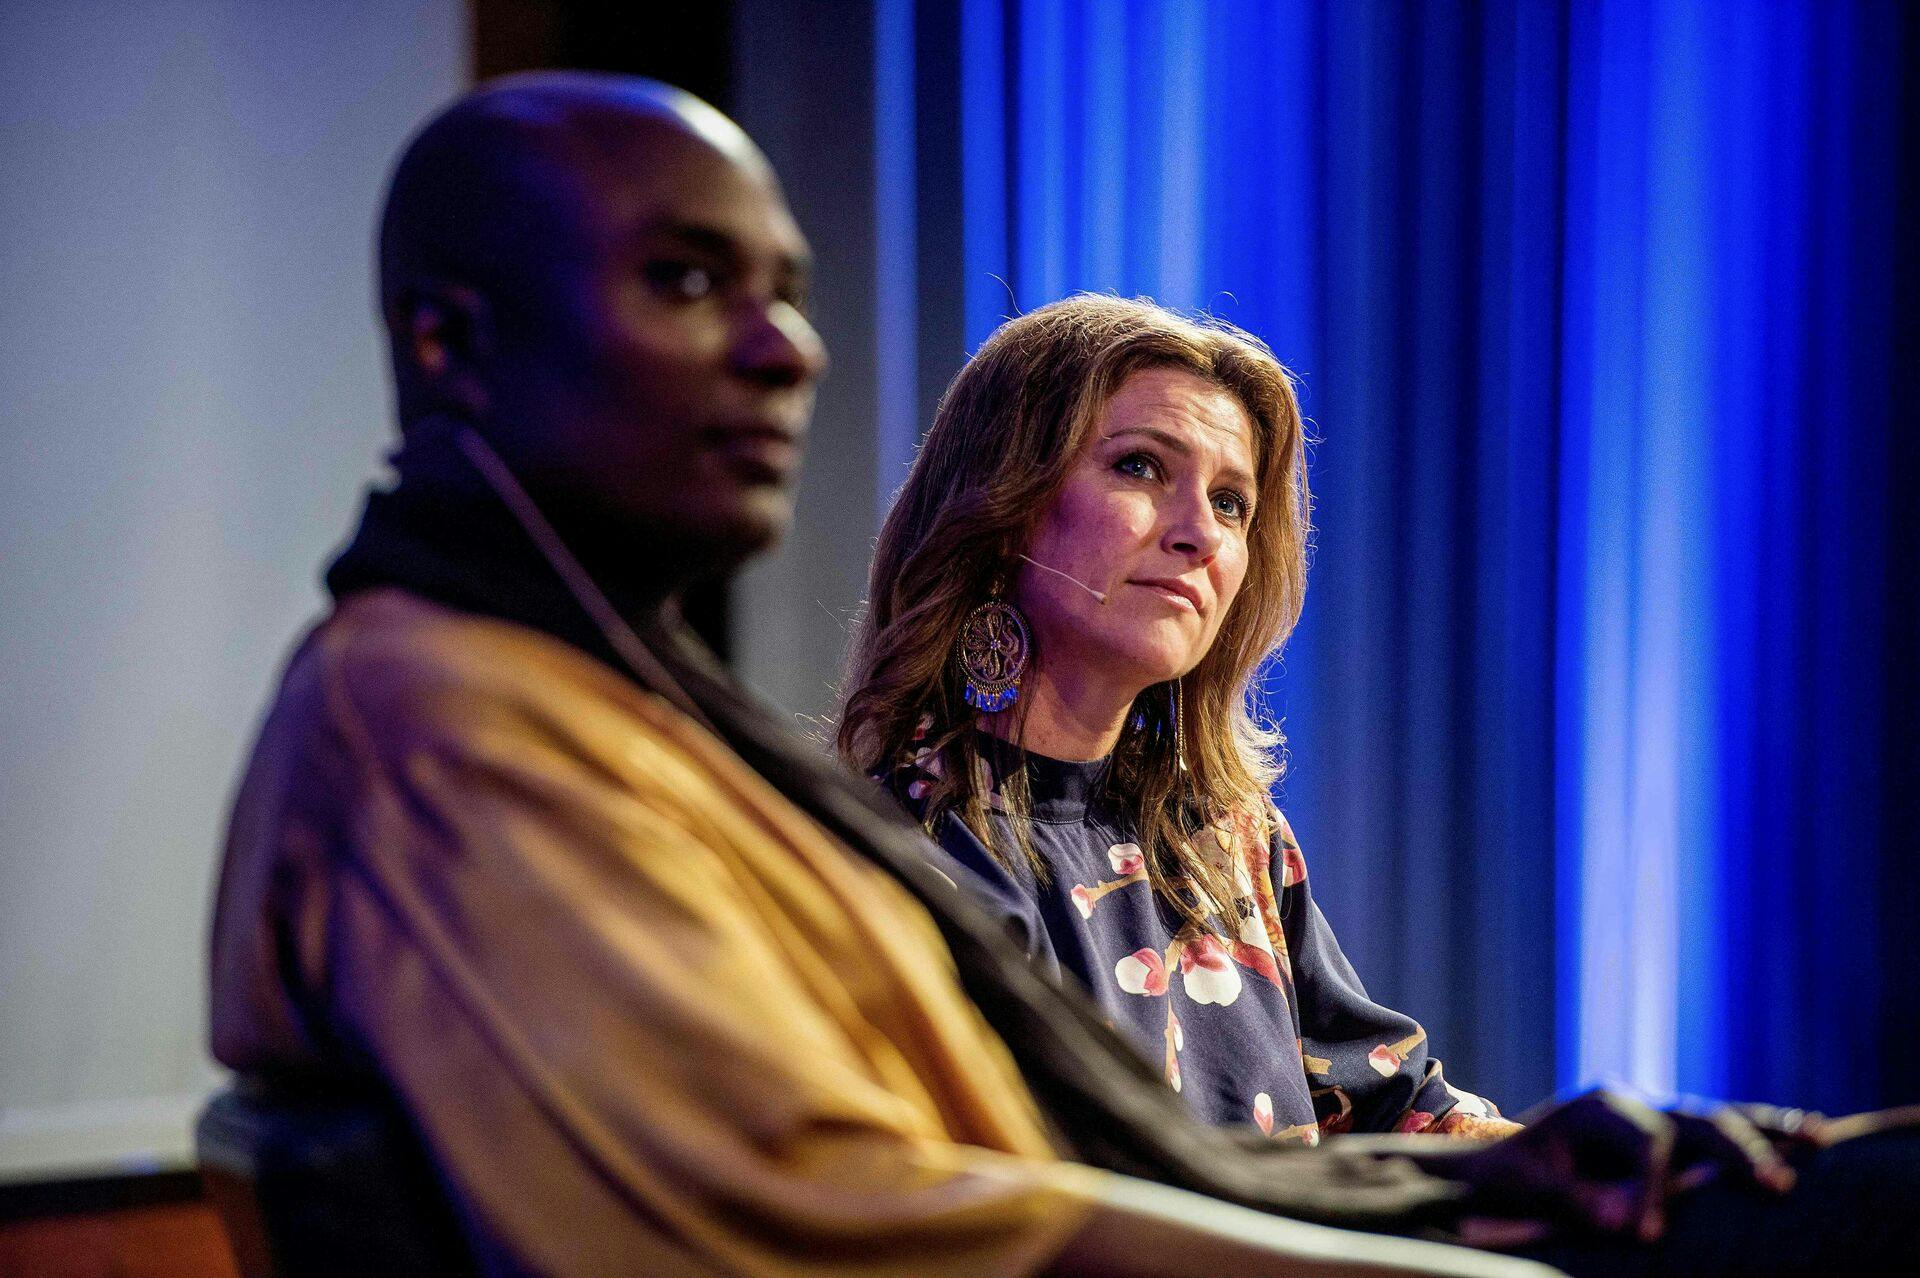 (FILES) In this file photo taken on May 20, 2019 Norwegian princess Maertha poses on stage with shaman Durek Verrett (L) during a session at Clarion hotel in Stavanger, Norway, on May 20, 2019. - Norway's royal court on June 7, 2022 announced the engagement of Princess Martha Louise to her boyfriend and self-professed shaman Durek Verrett. (Photo by Carina Johansen / various sources / AFP) / Norway OUT